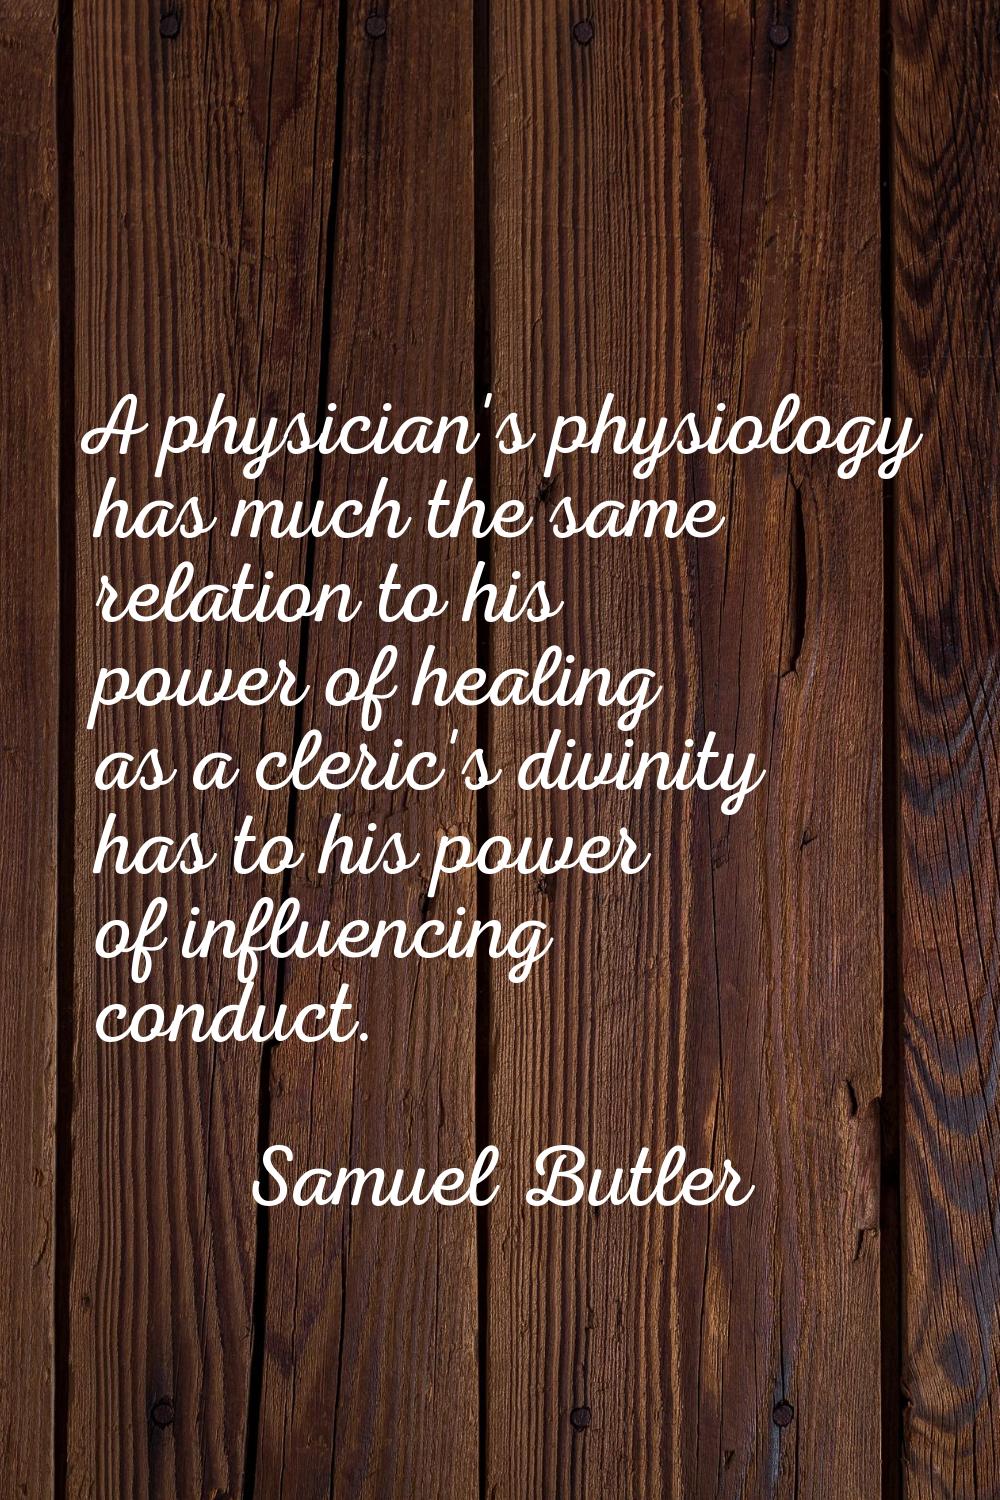 A physician's physiology has much the same relation to his power of healing as a cleric's divinity 